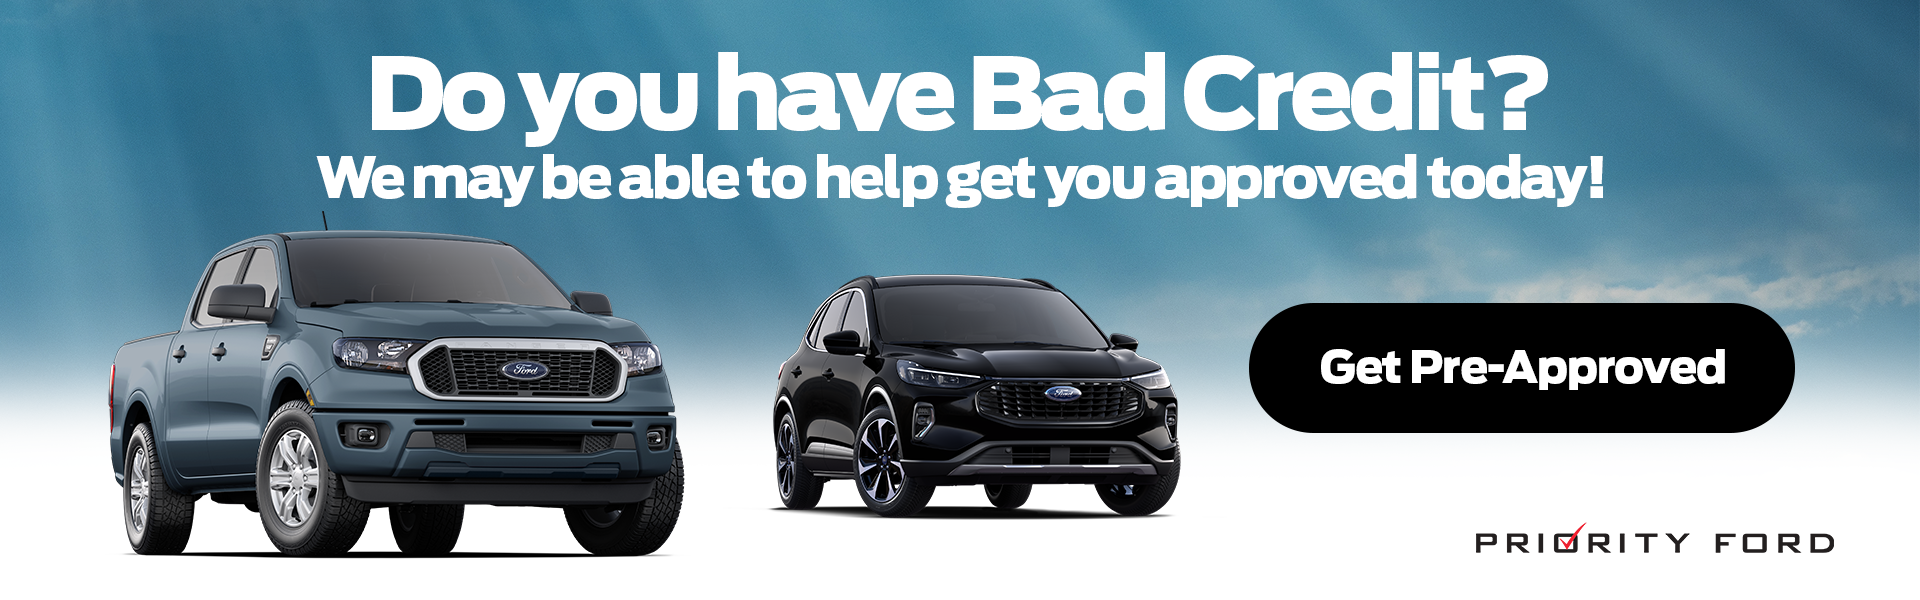 Worried about getting an auto loan? We'll help to get you approved!